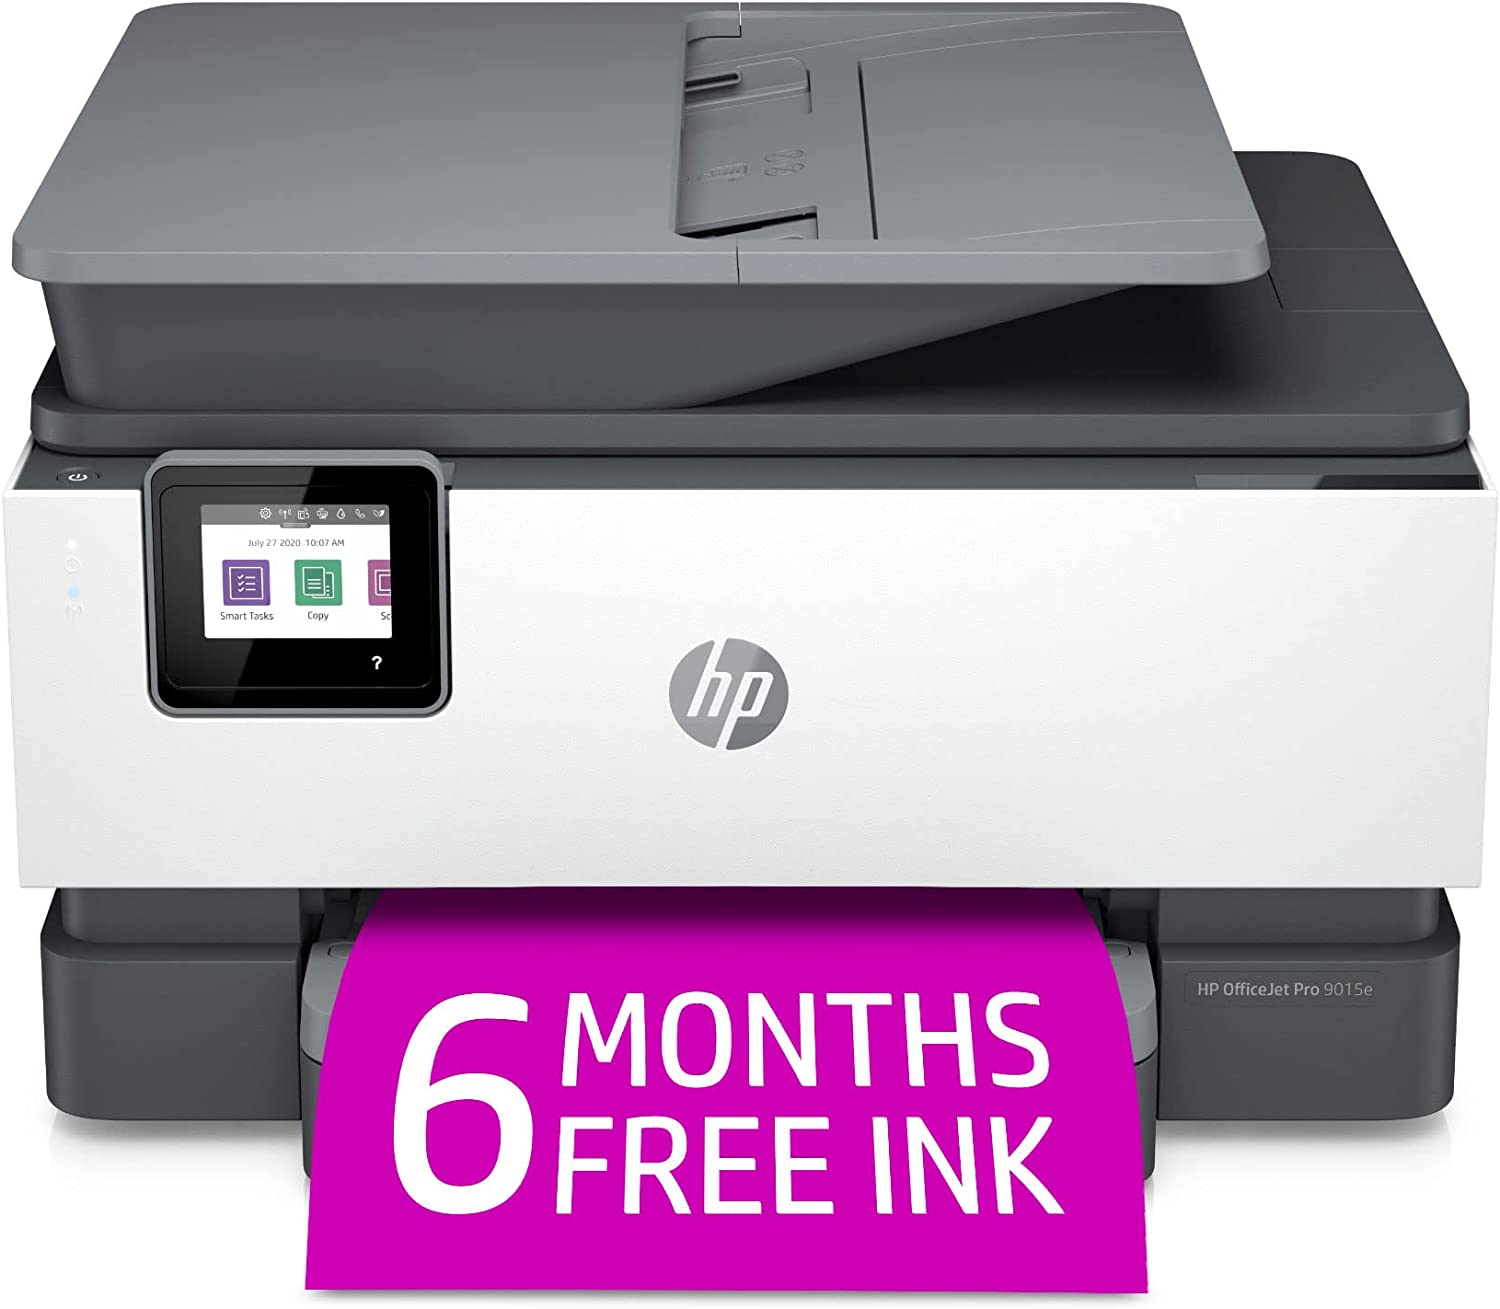 HP OfficeJet Pro 9018e Wireless AIO Color Inkjet Printer w/ Bonus 6 Months Instant Ink with HP+ $139.99 + Free Shipping